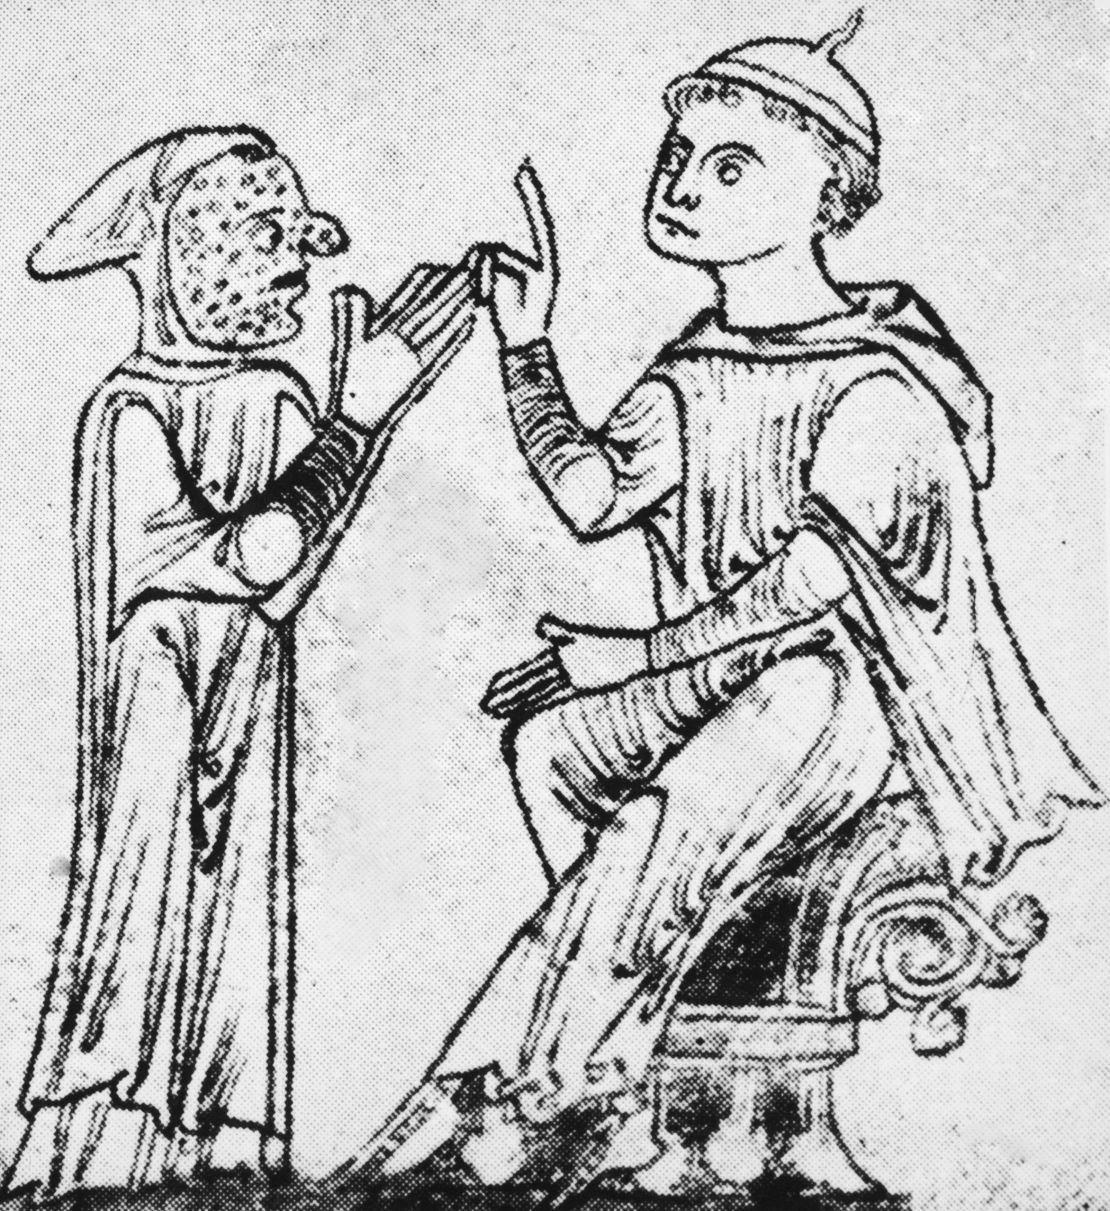 Circa 1200, a leper covered in sores approaches a man, making a gesture of supplication.